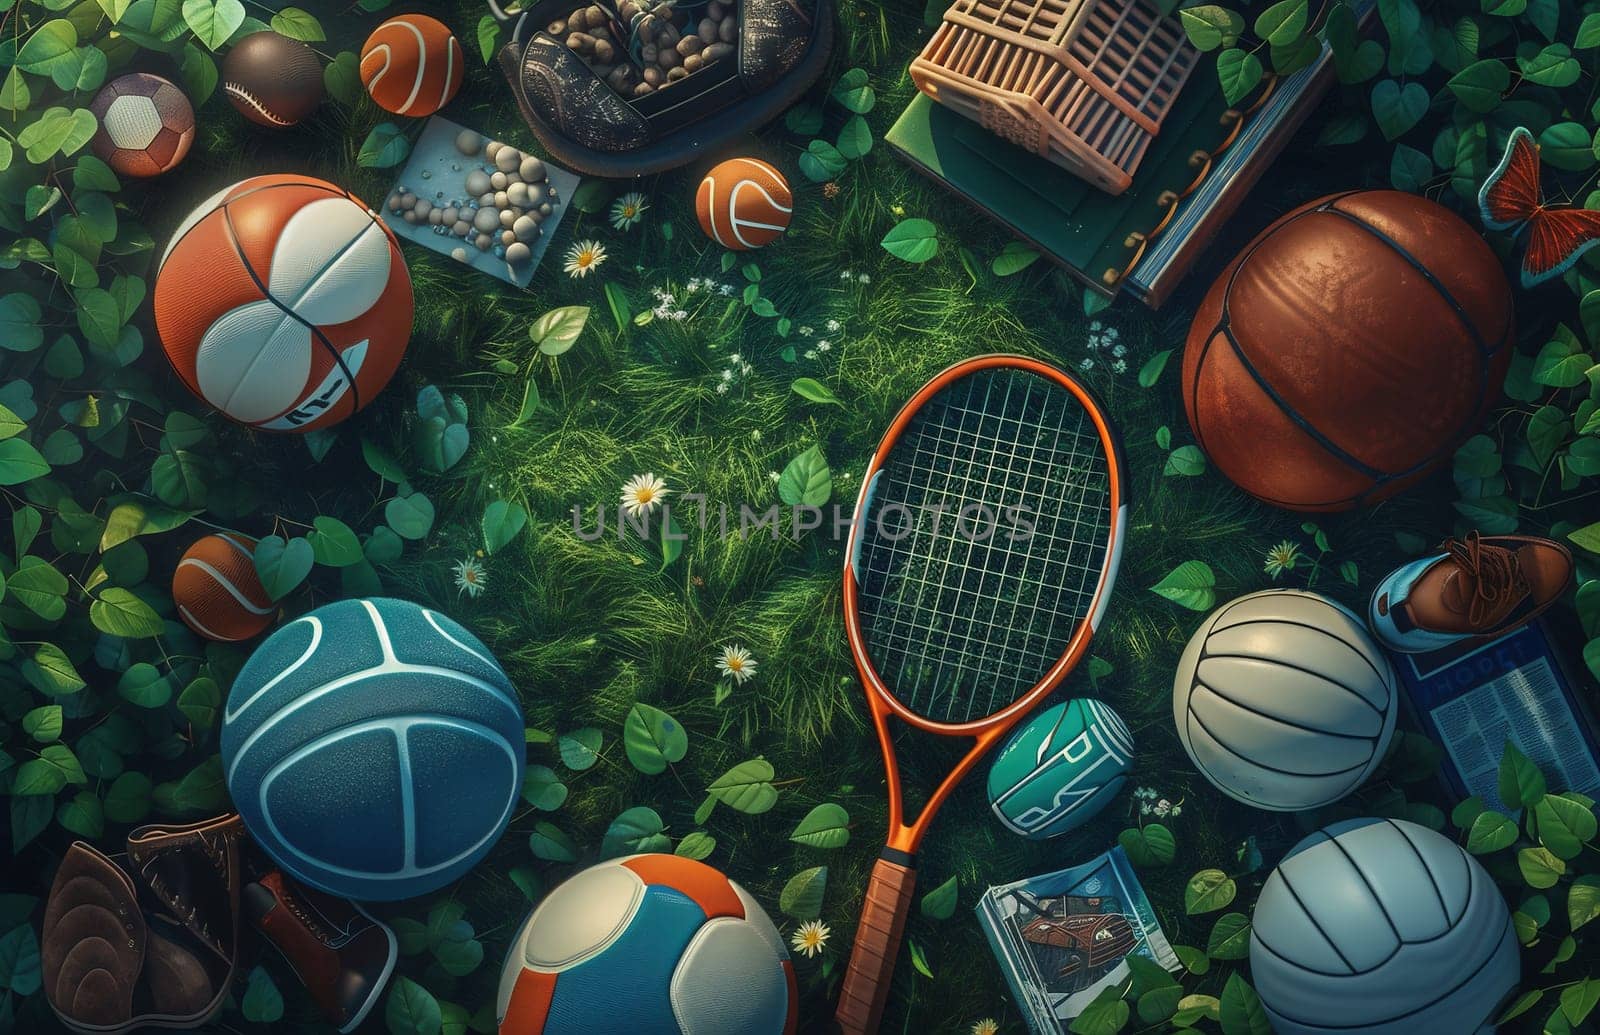 Sport games background - basketball, soccer ball, rackets, sneakers - copy space. High quality photo